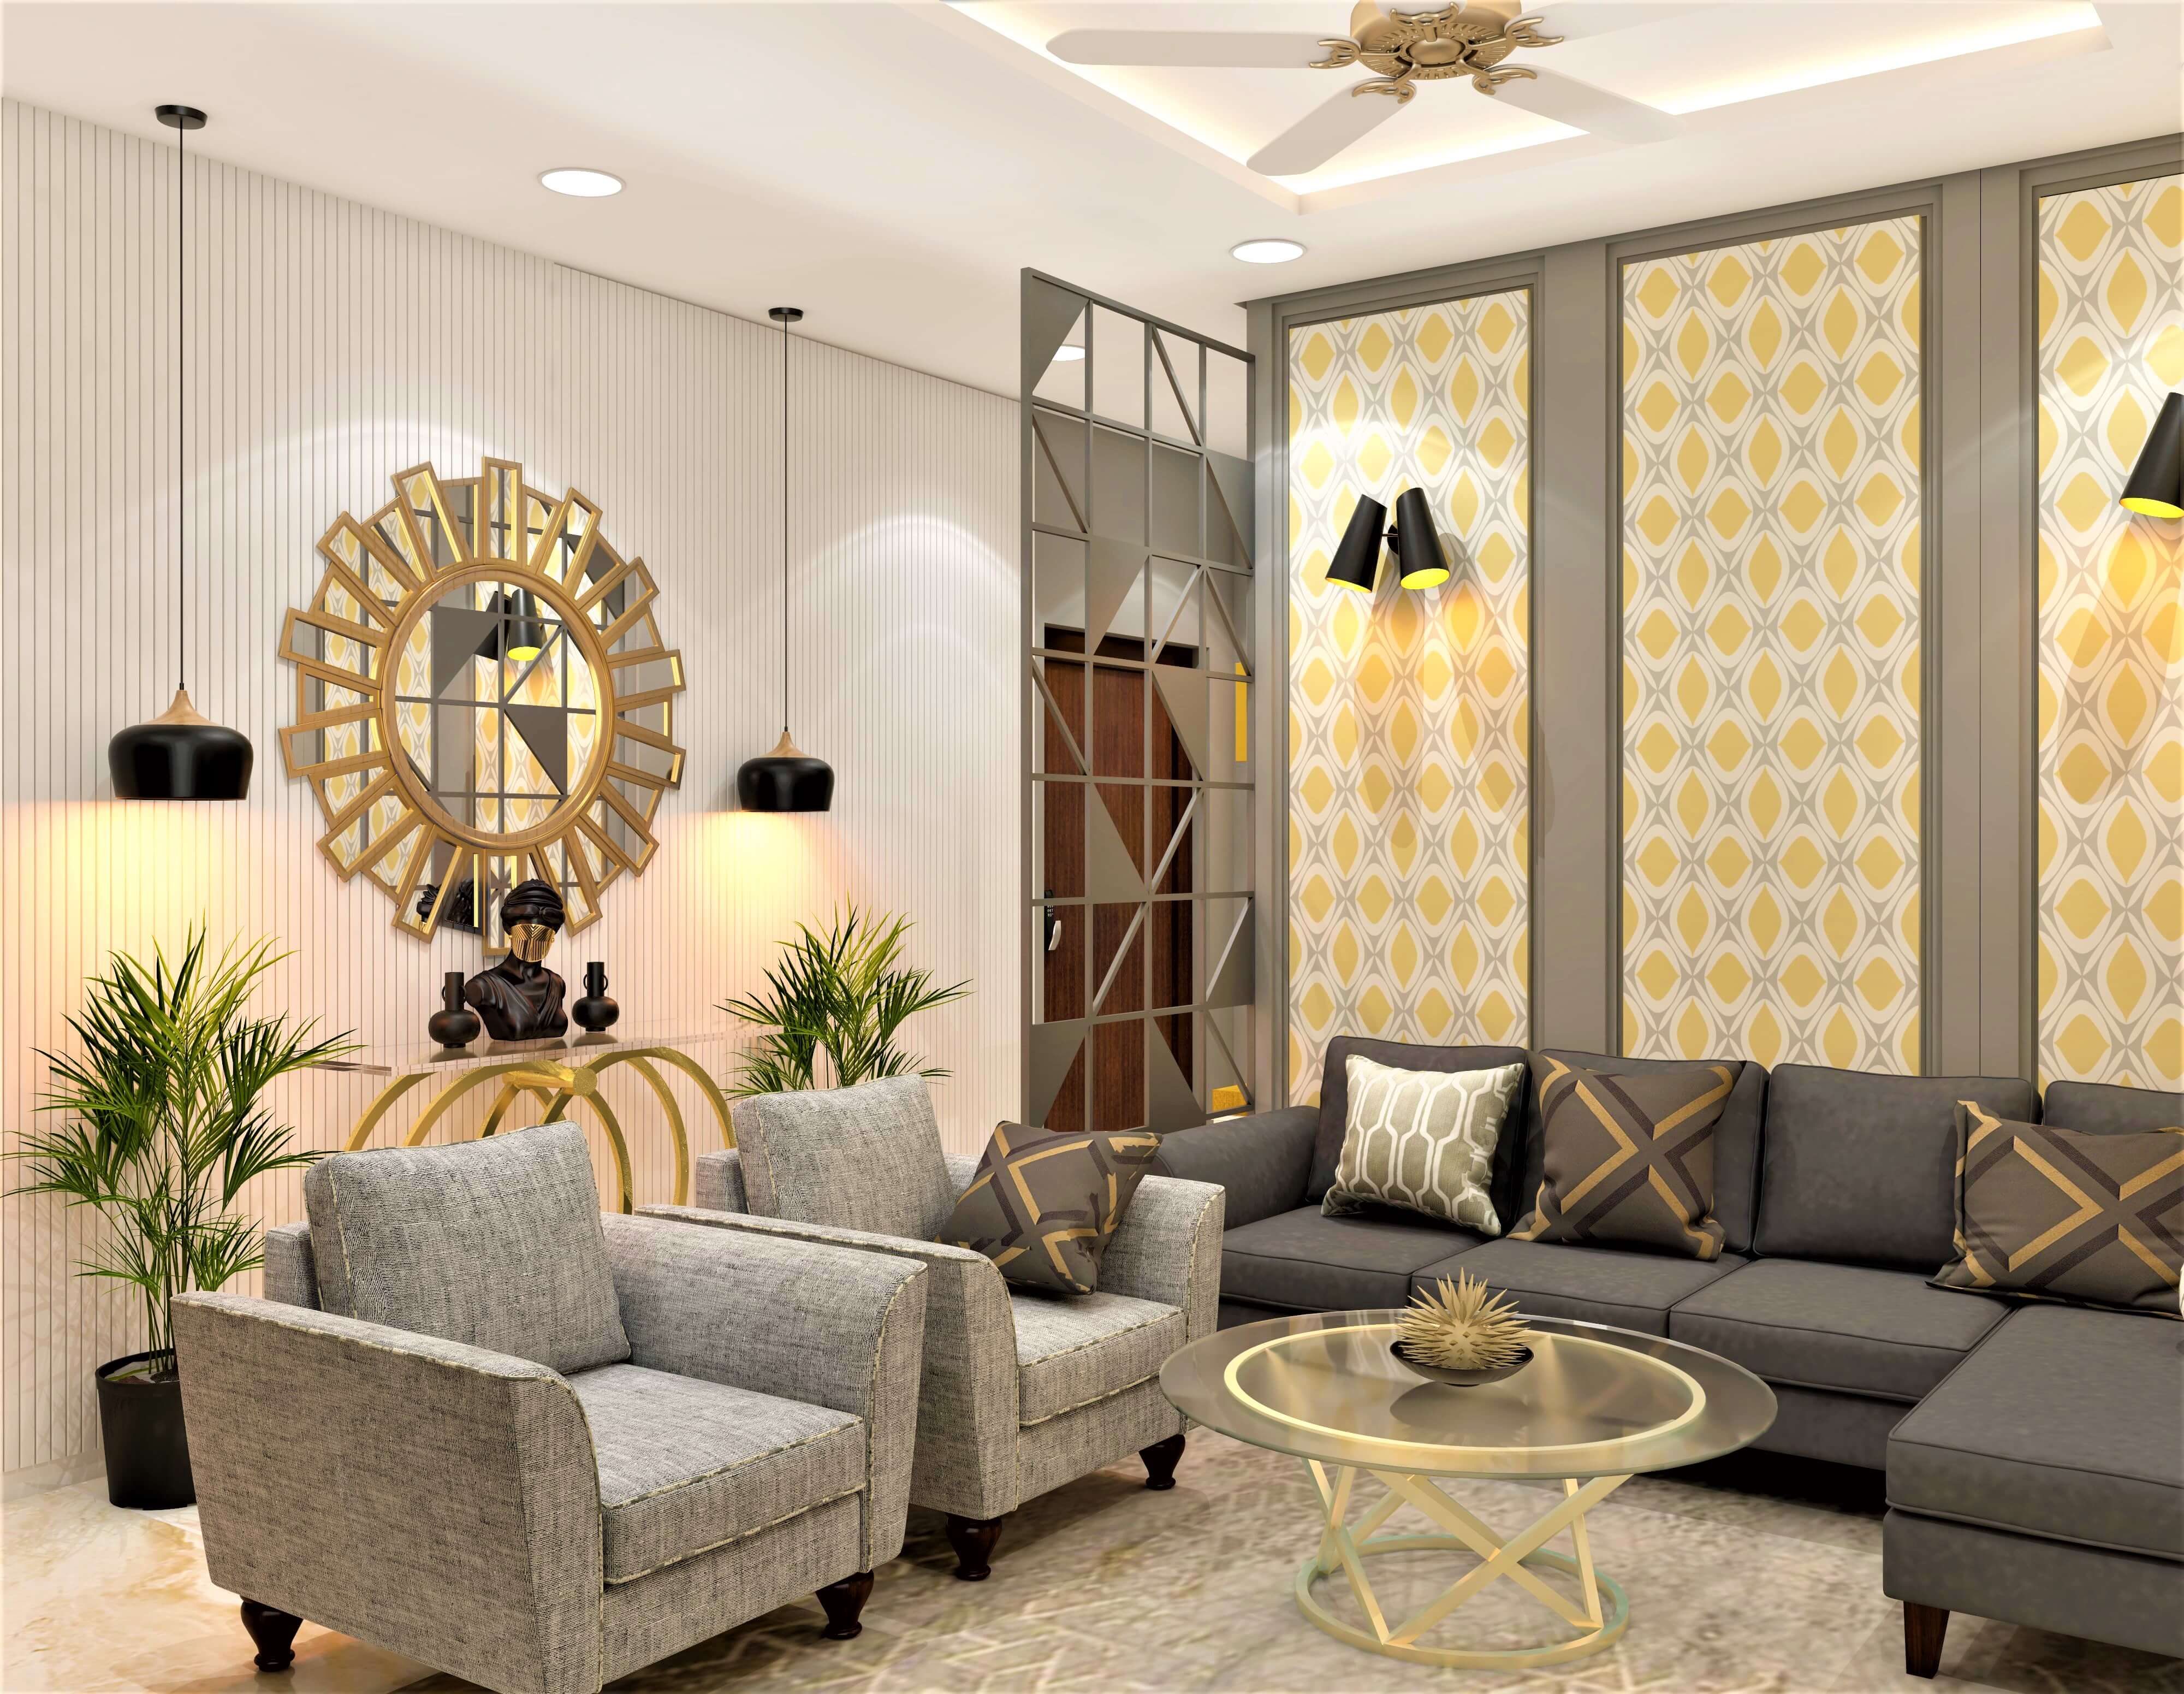 Modern living room design with wall trims design - Beautiful Homes